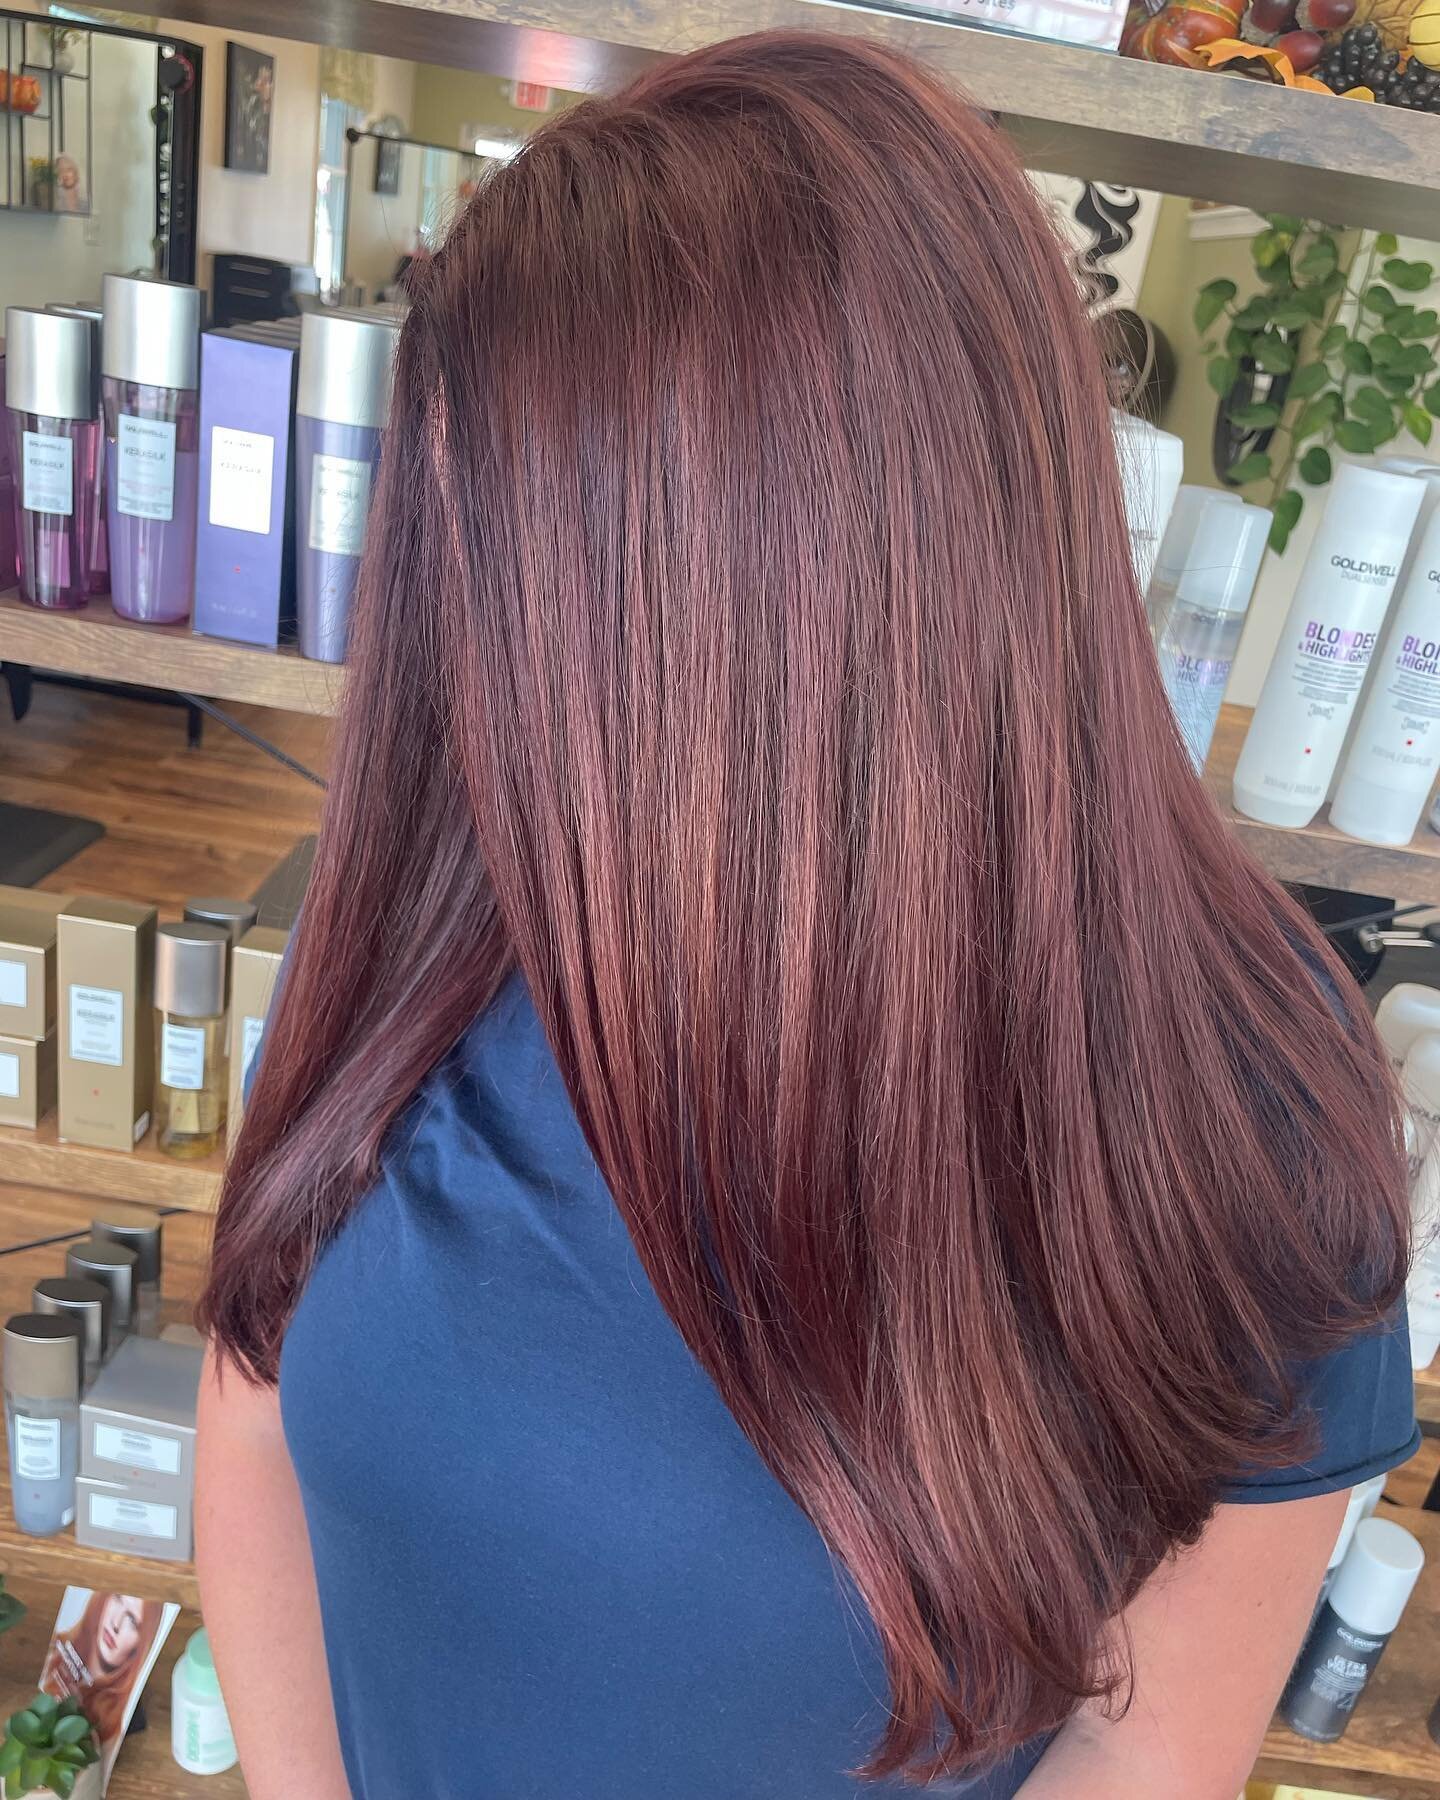 🍁Fall into Autumn 🍁
Styled with Goldwell&rsquo;s Just Smooth, Flat marvel 
And Kerasilk&rsquo;s Reconstruct Blowdry spray 

Hair by Ron May

Call us at 856.624.9140 to book your appointment. 

#goldwell #goldwellcolor #goldwellapprovedus #goldwellc